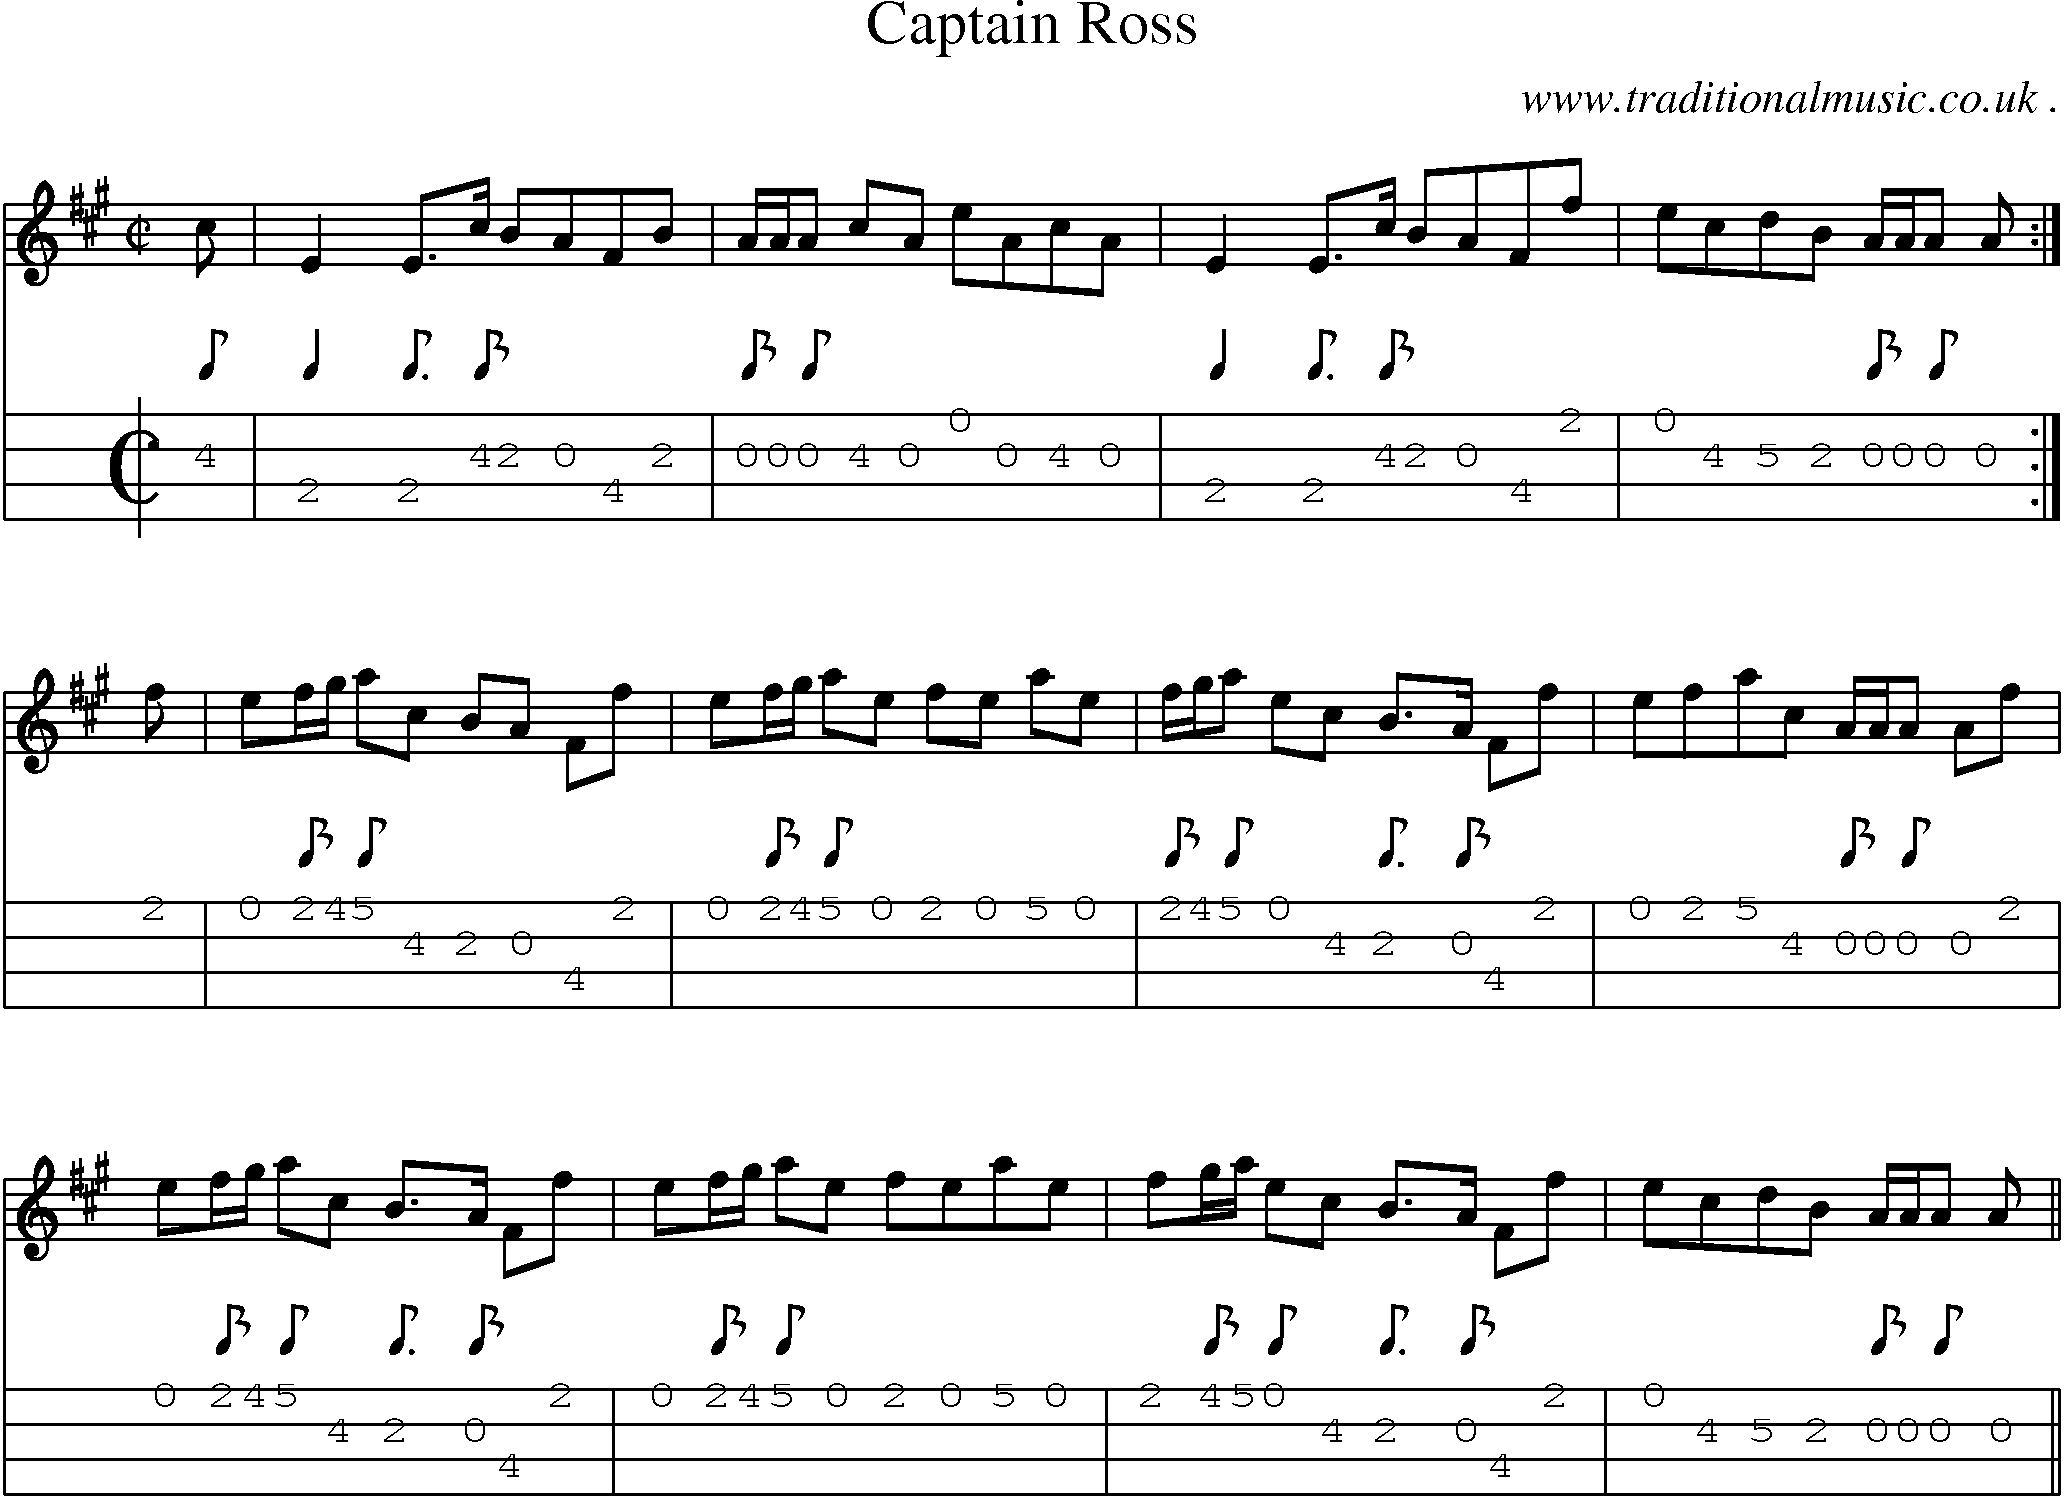 Sheet-music  score, Chords and Mandolin Tabs for Captain Ross